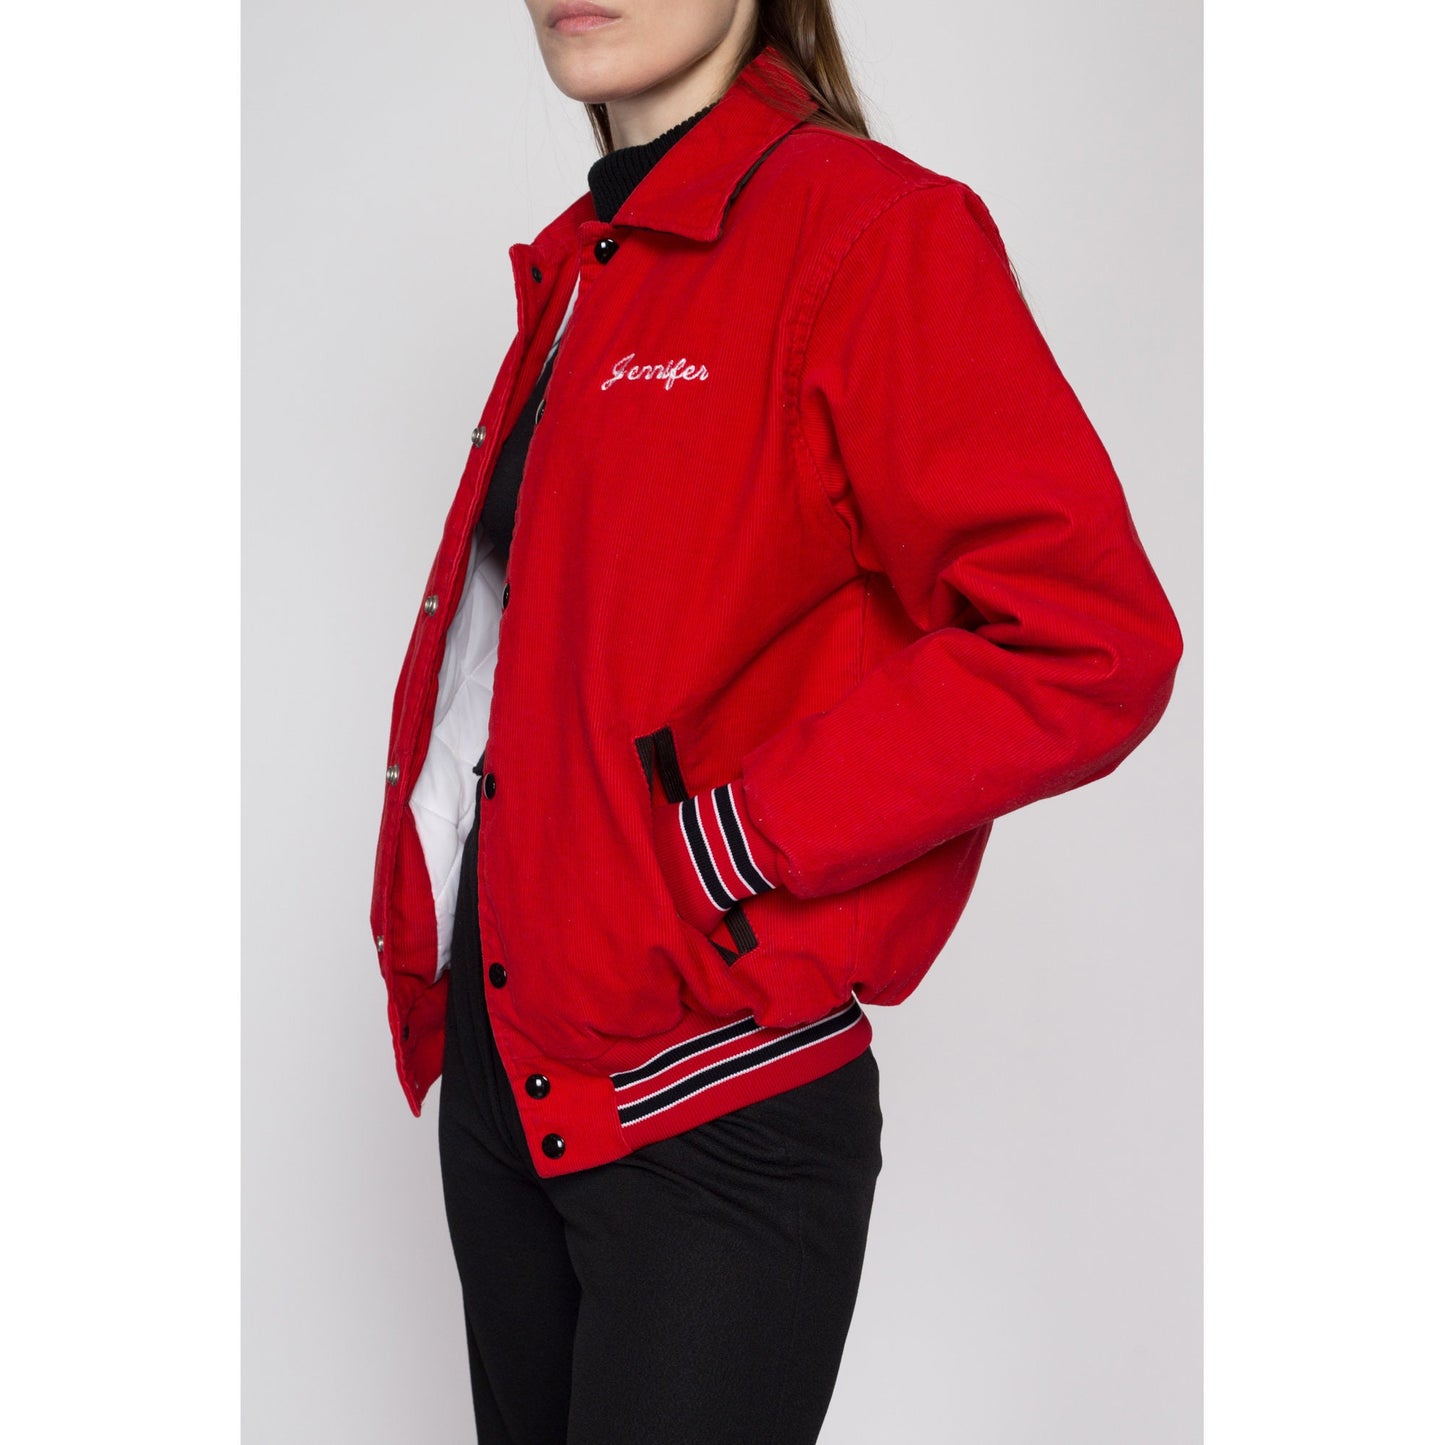 Small 80s Red Corduroy Soccer Team Varsity Jacket | Vintage Striped Trim Snap Button Athletic Bomber